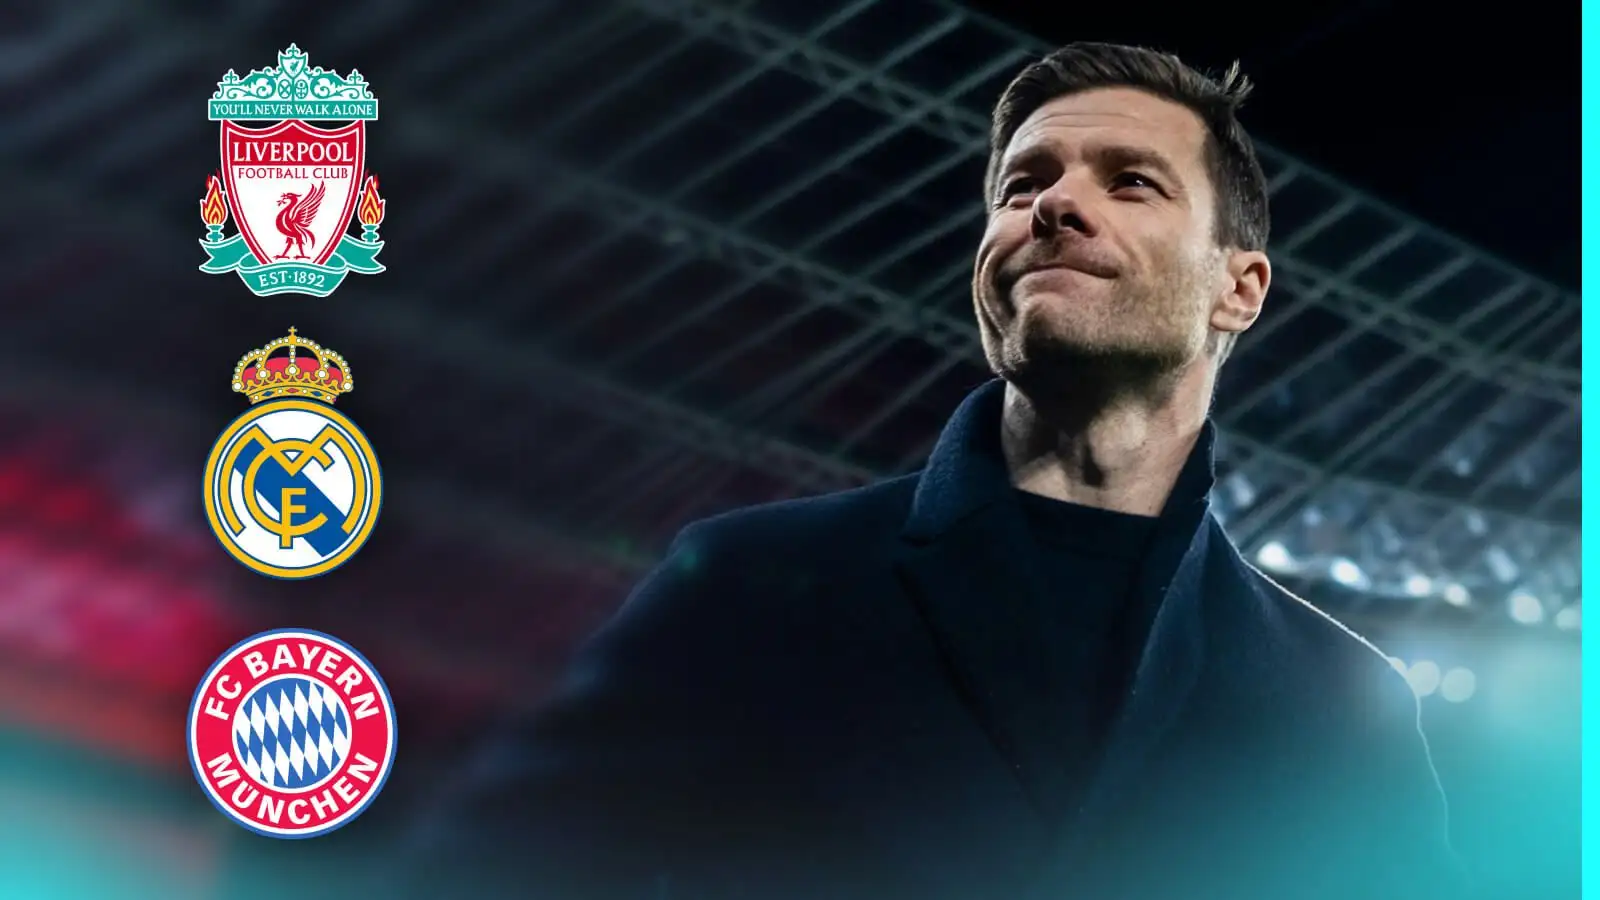 Liverpool, Real Madrid and also Bayern target Xabi Alonso visual glamors on in the past a match.